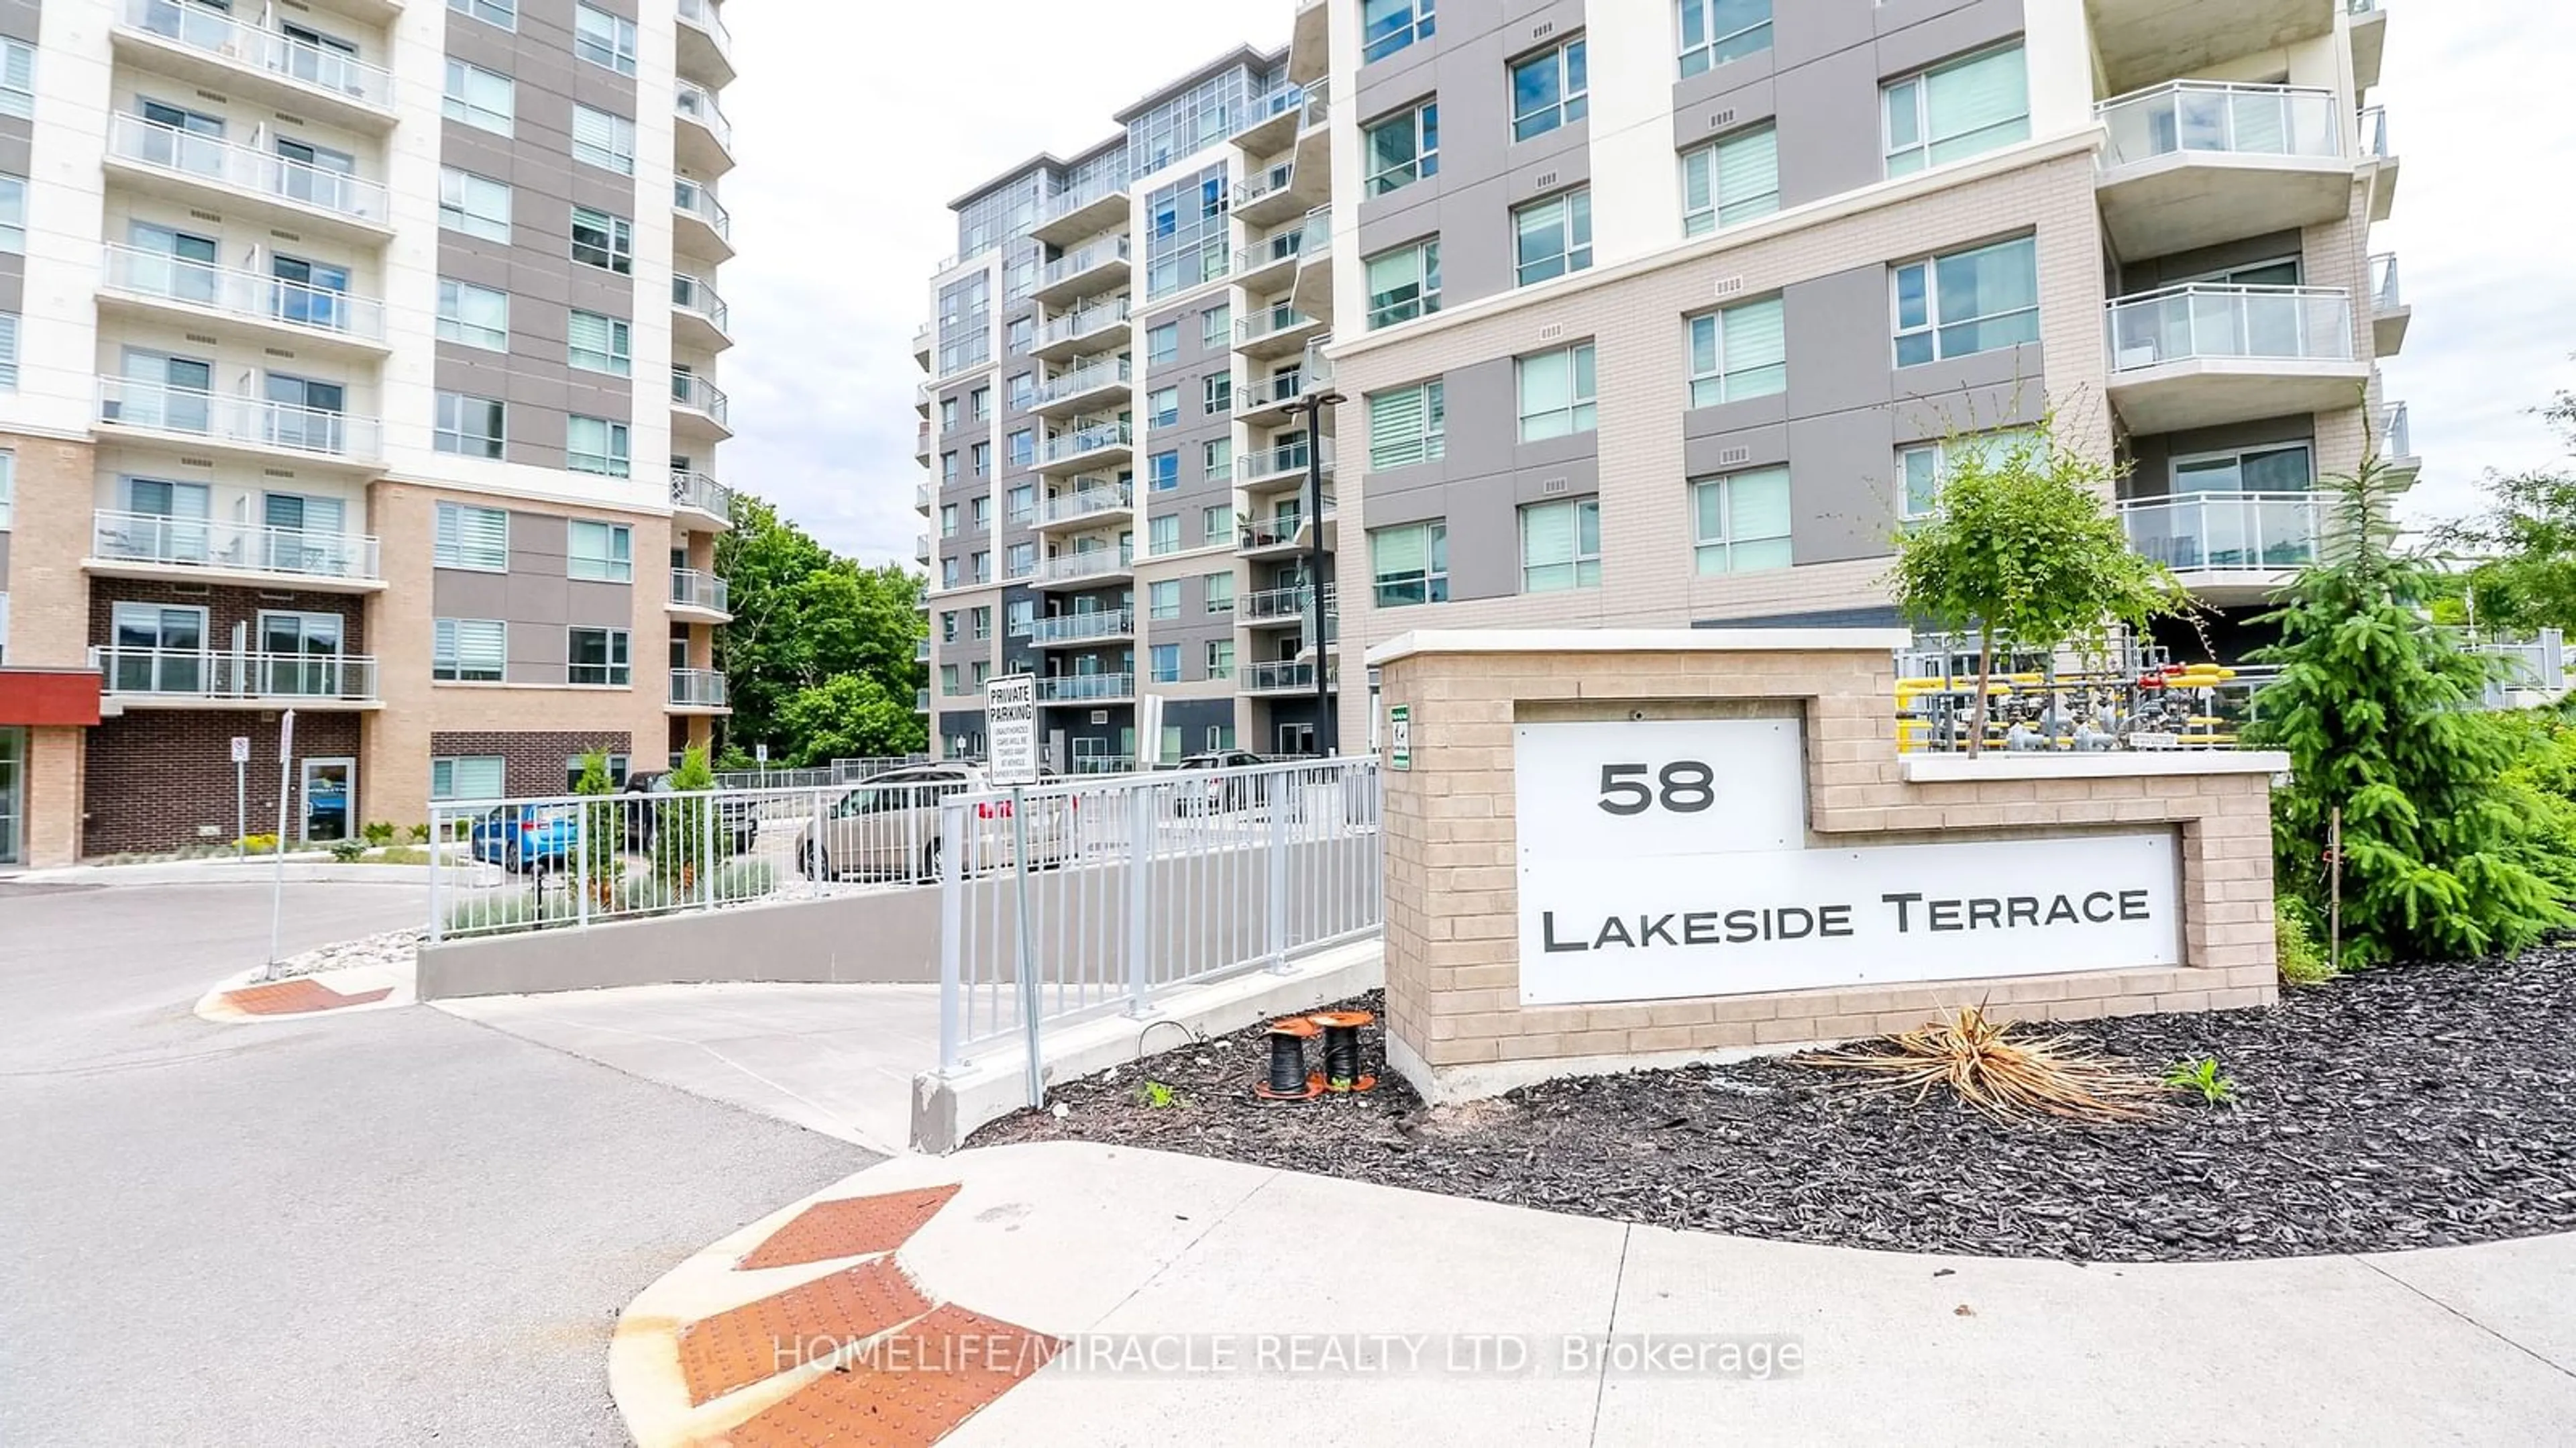 Lakeview for 58 Lakeside Terr #501, Barrie Ontario L4M 0L5